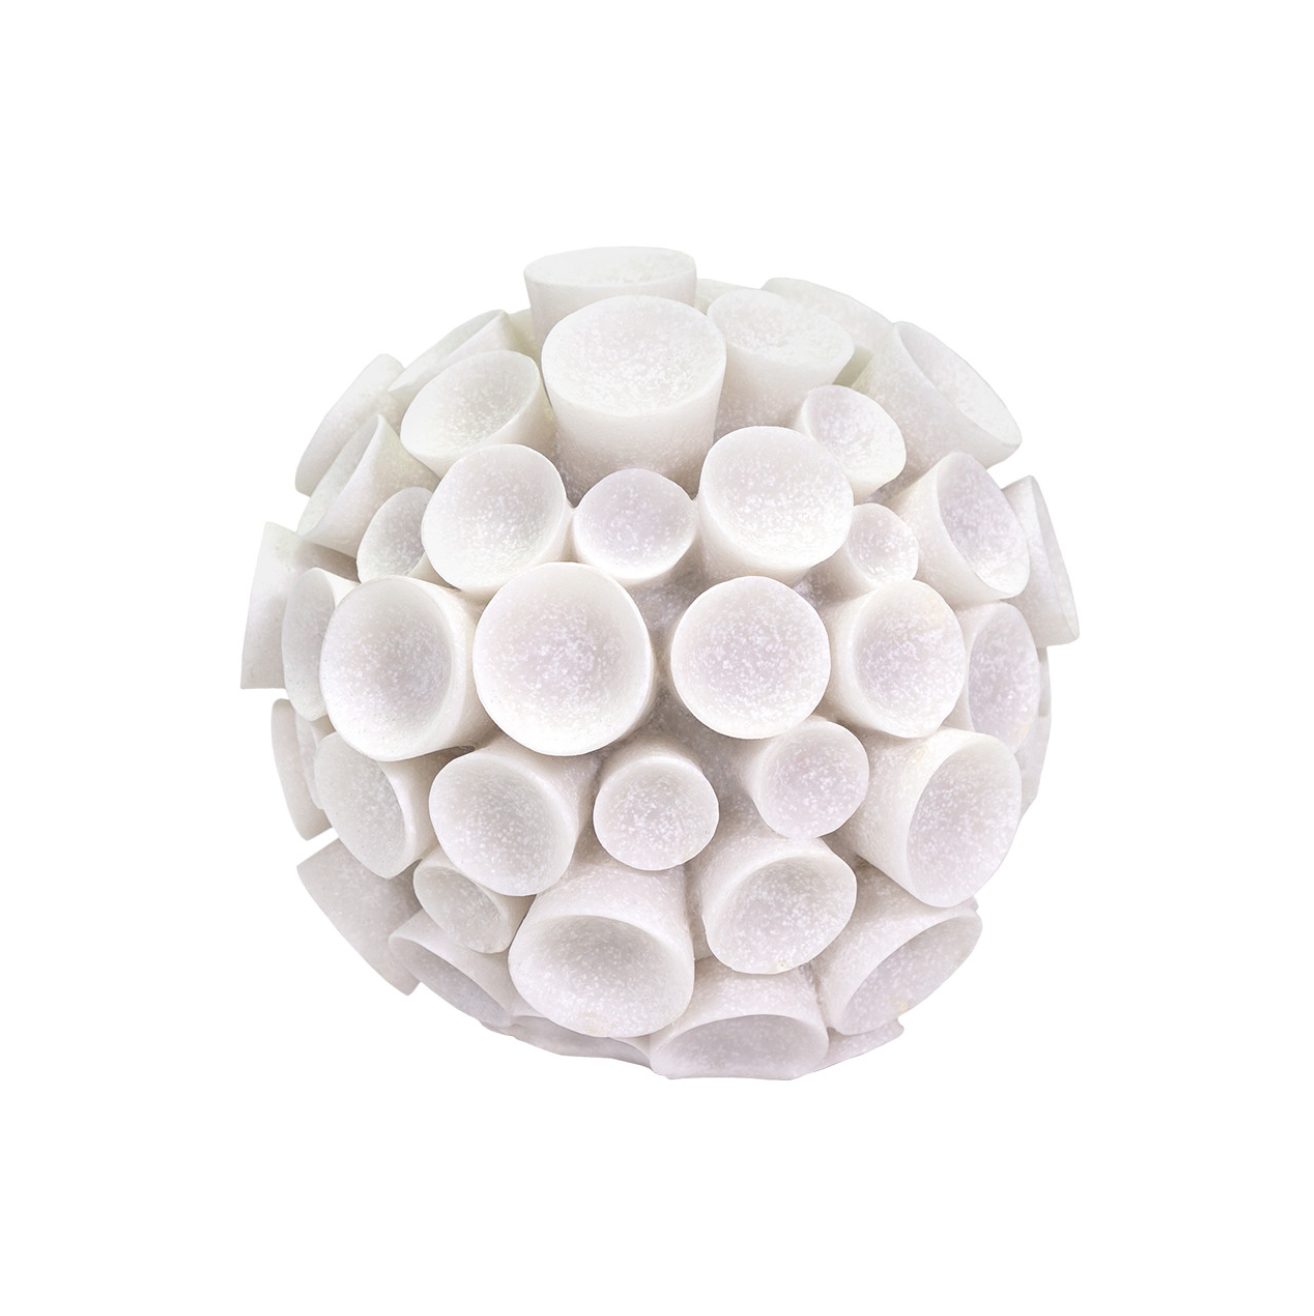 A Lela coral statuary, entirely covered with white, cylindrical marshmallows, showcased against a plain white background in Scottsdale, Arizona by The Import Collection.